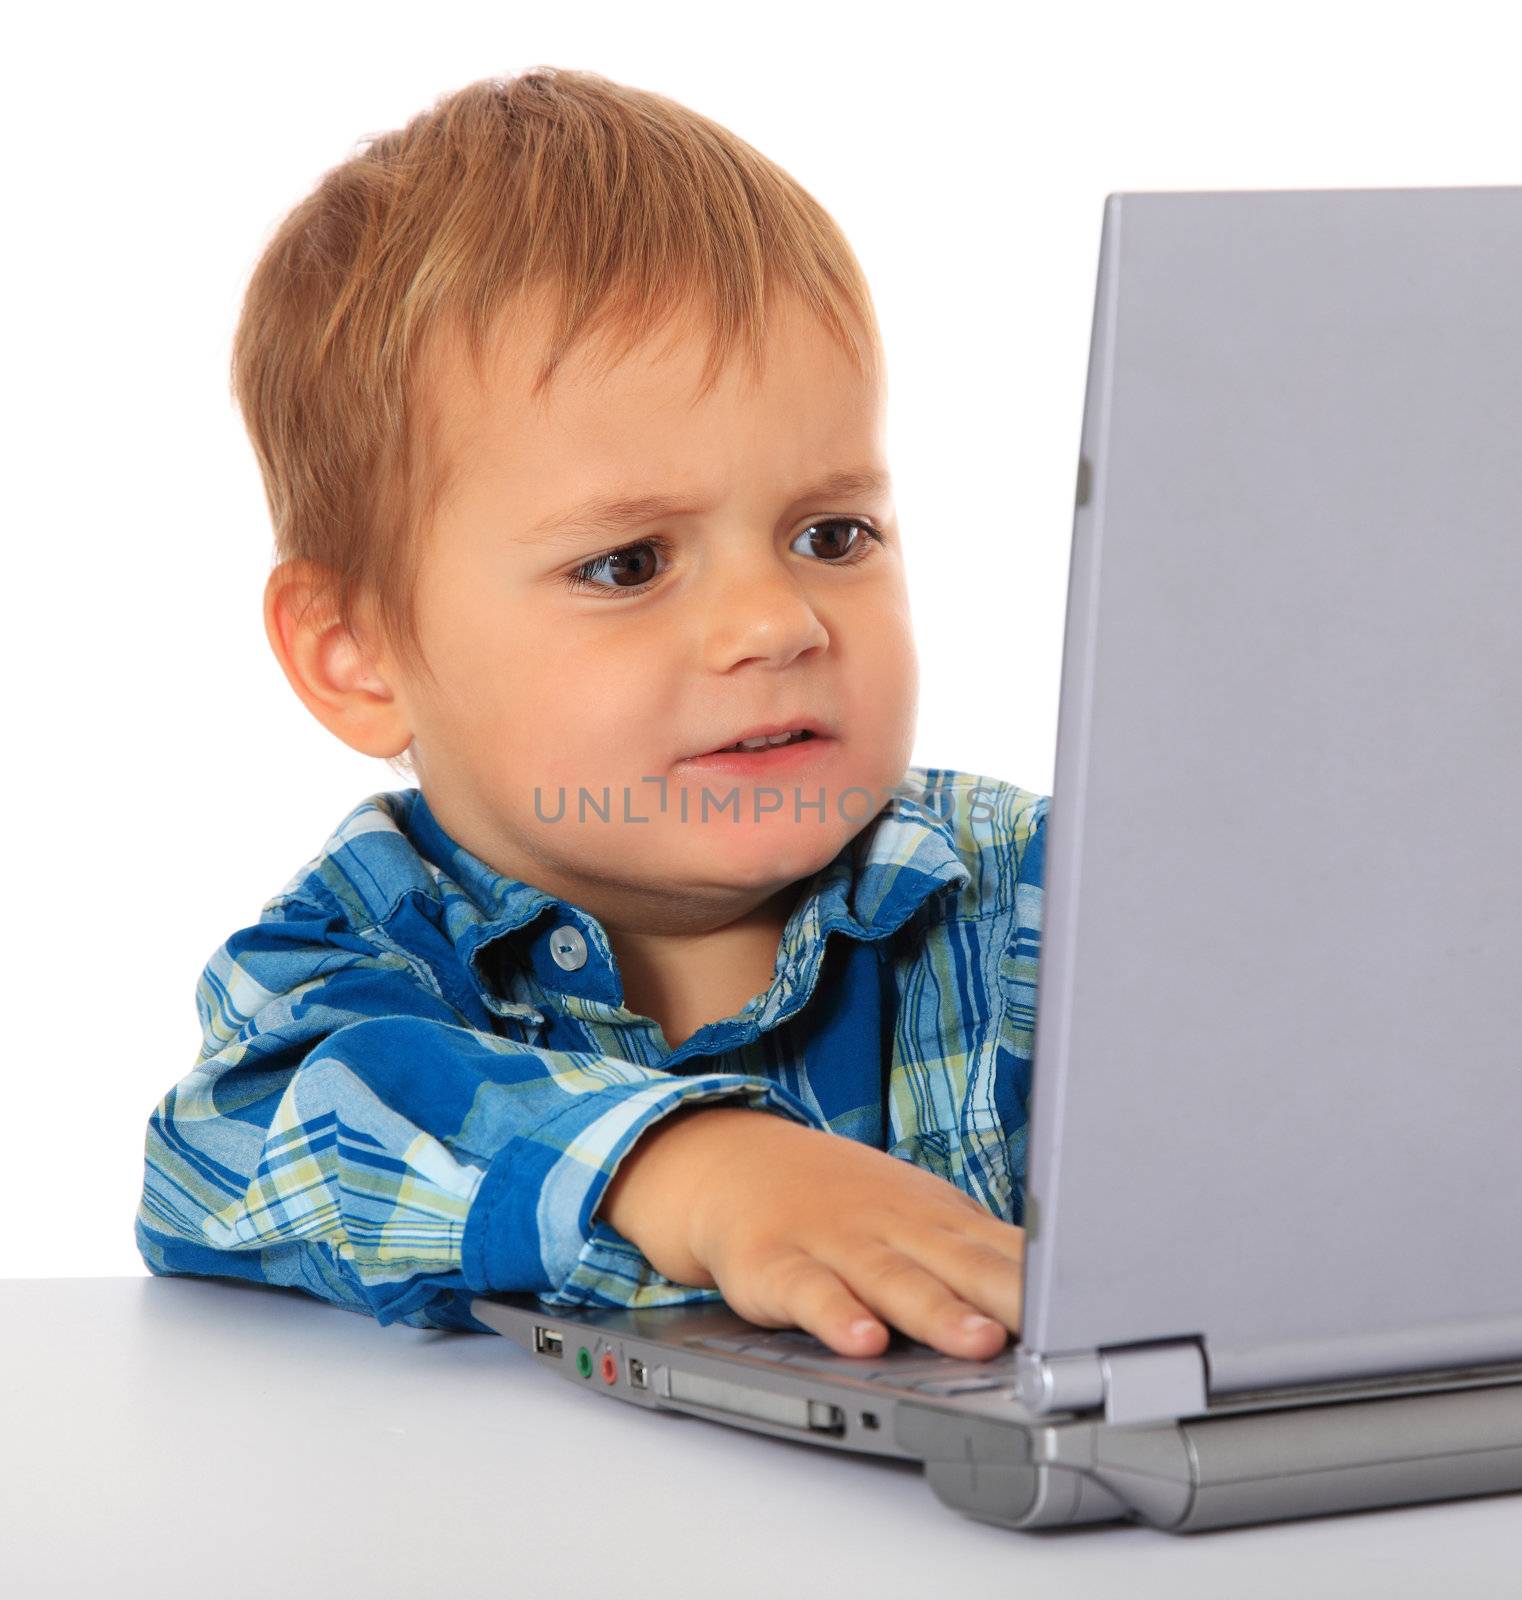 Cute caucasian boy cant handle a laptop. All on white background.